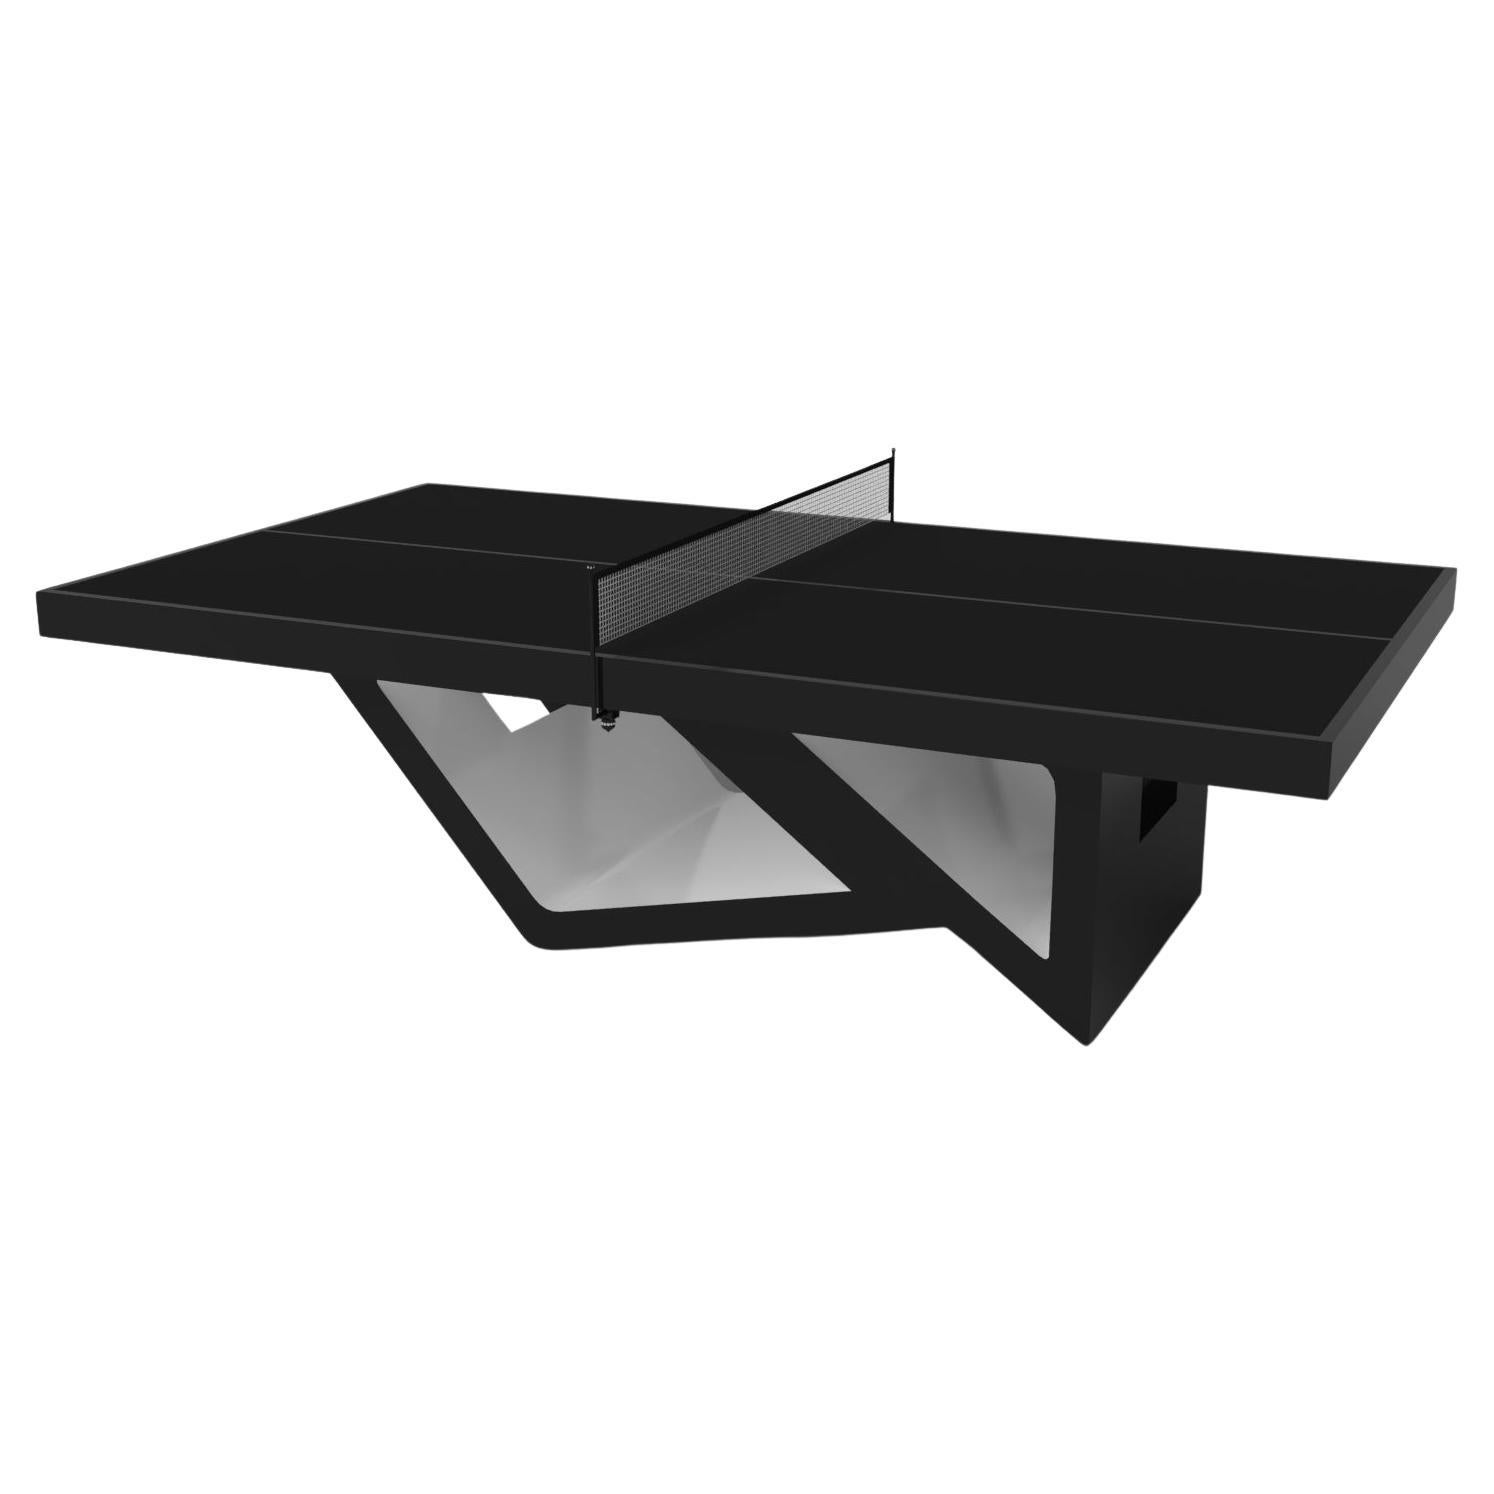 Elevate Customs Rumba Tennis Table / Solid Pantone Black in 9' - Made in USA For Sale